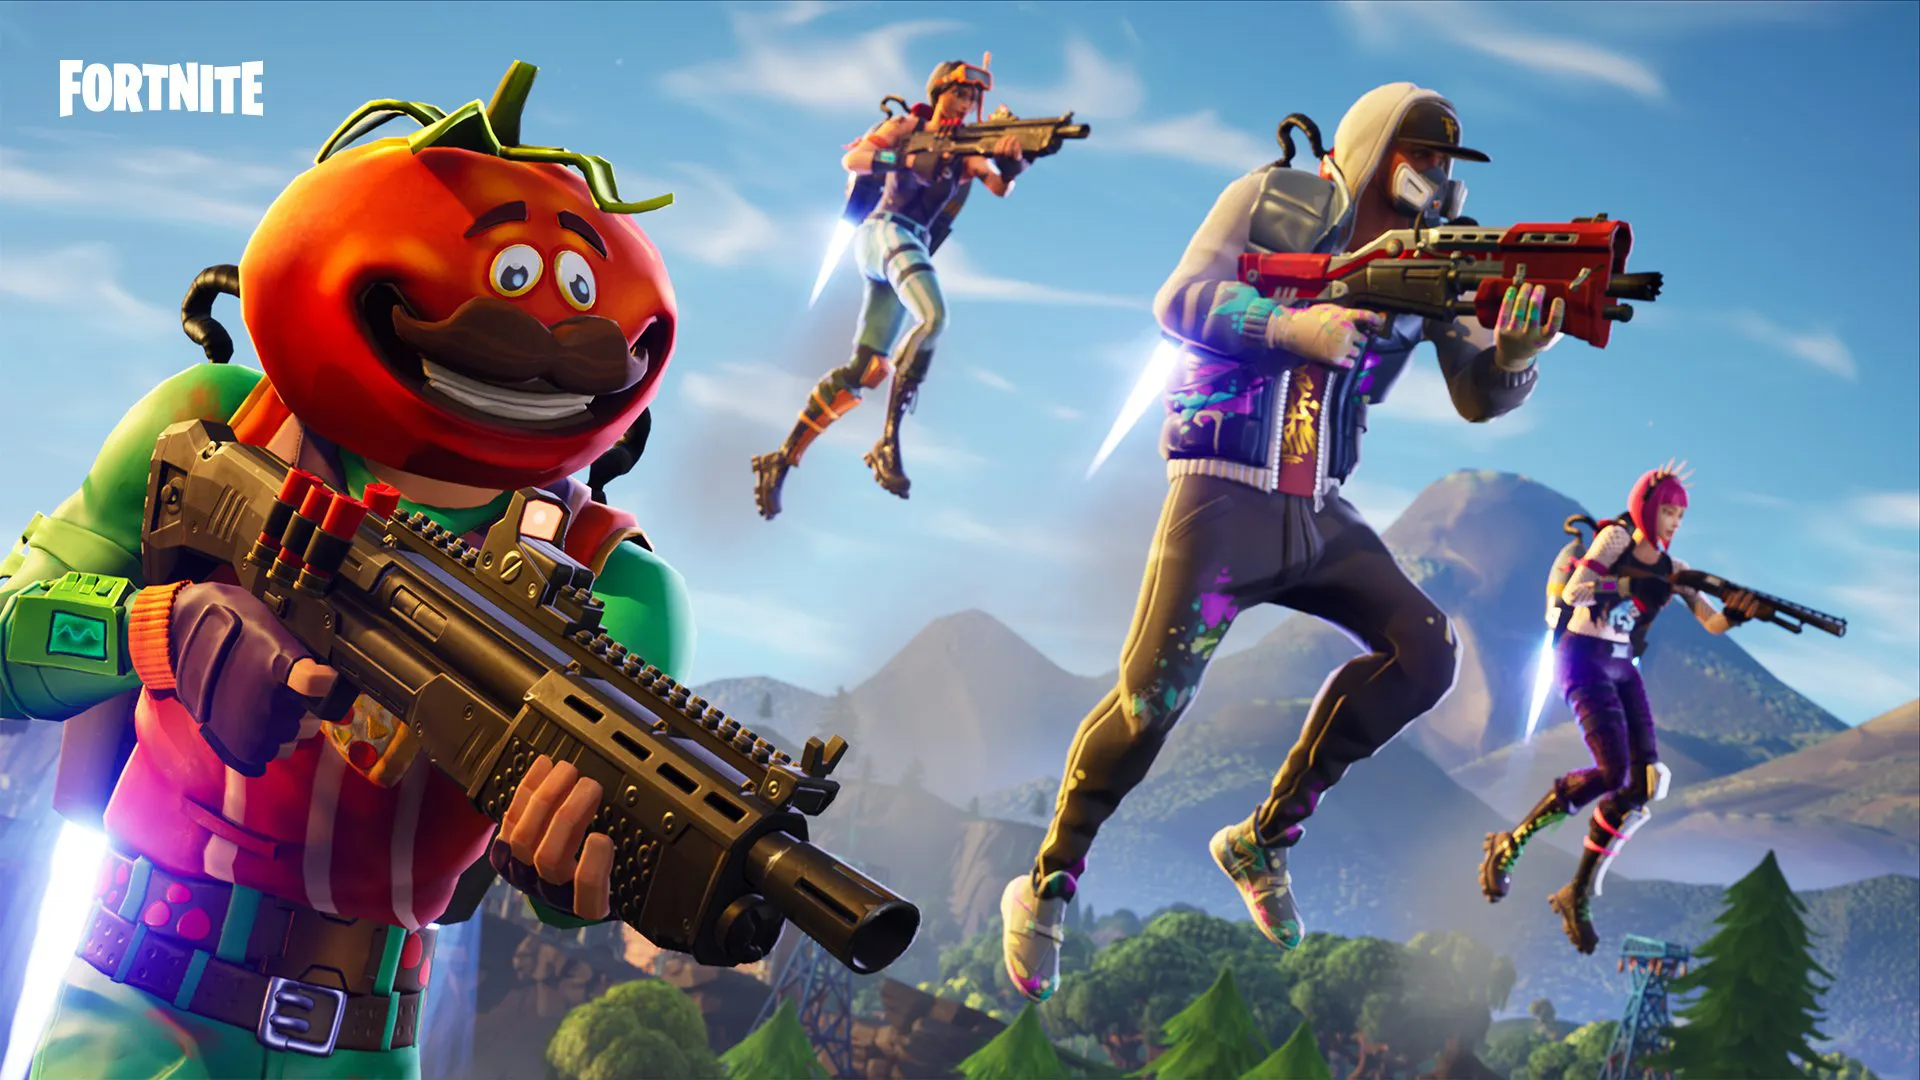 Fortnite Wallpapers (Chapter 2: Season 1) – HD, iPhone, & Mobile